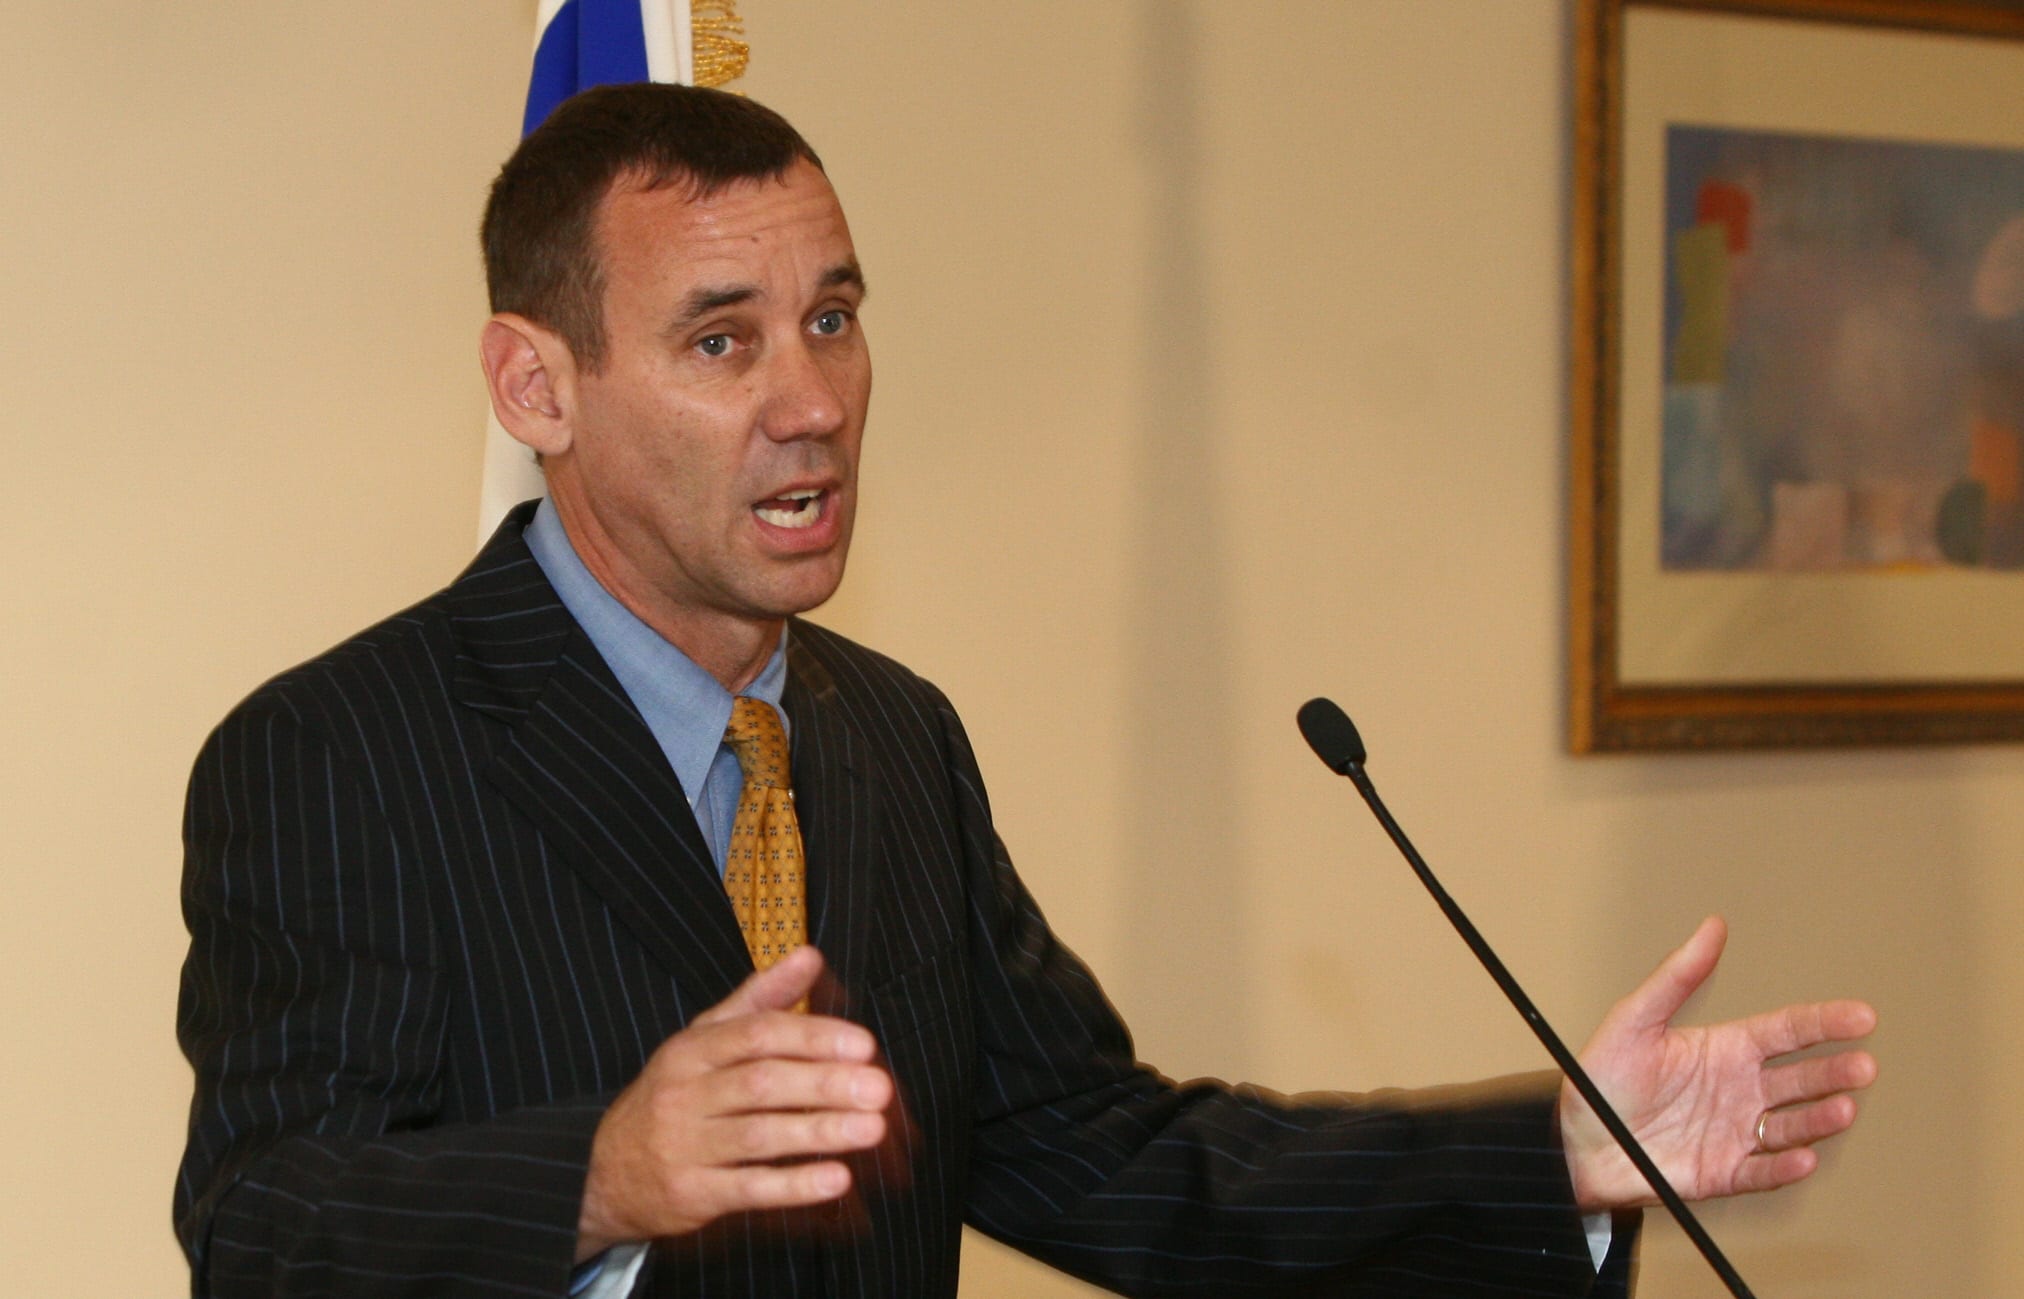 Mark Regev, pictured here in 2008, has said the comments did not reflect the embassy or the government's view.